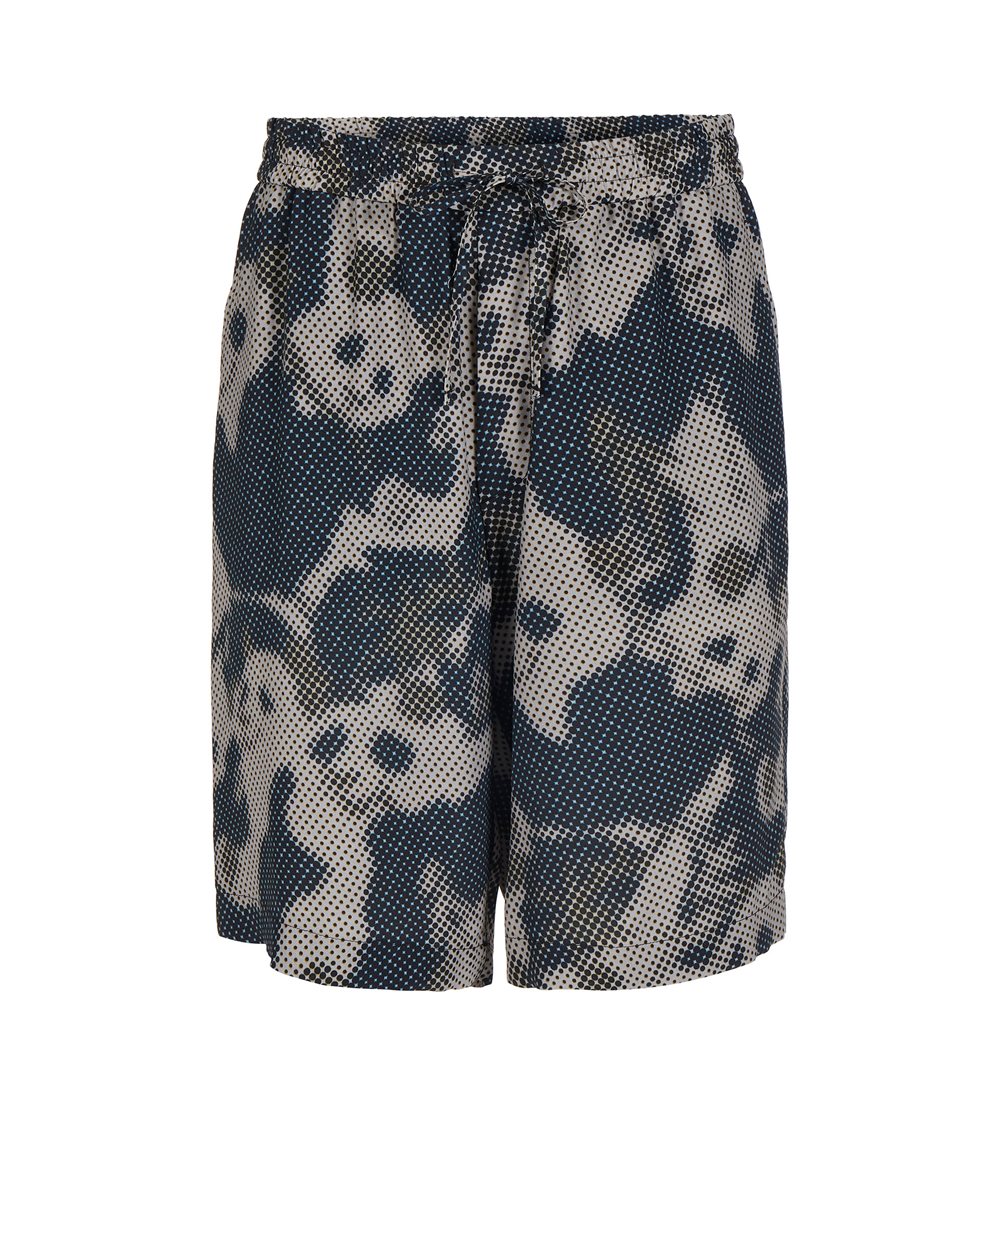 Bermuda shorts with pixel print and logo - VALENTINE'S DAY GIFTS | Iceberg - Official Website